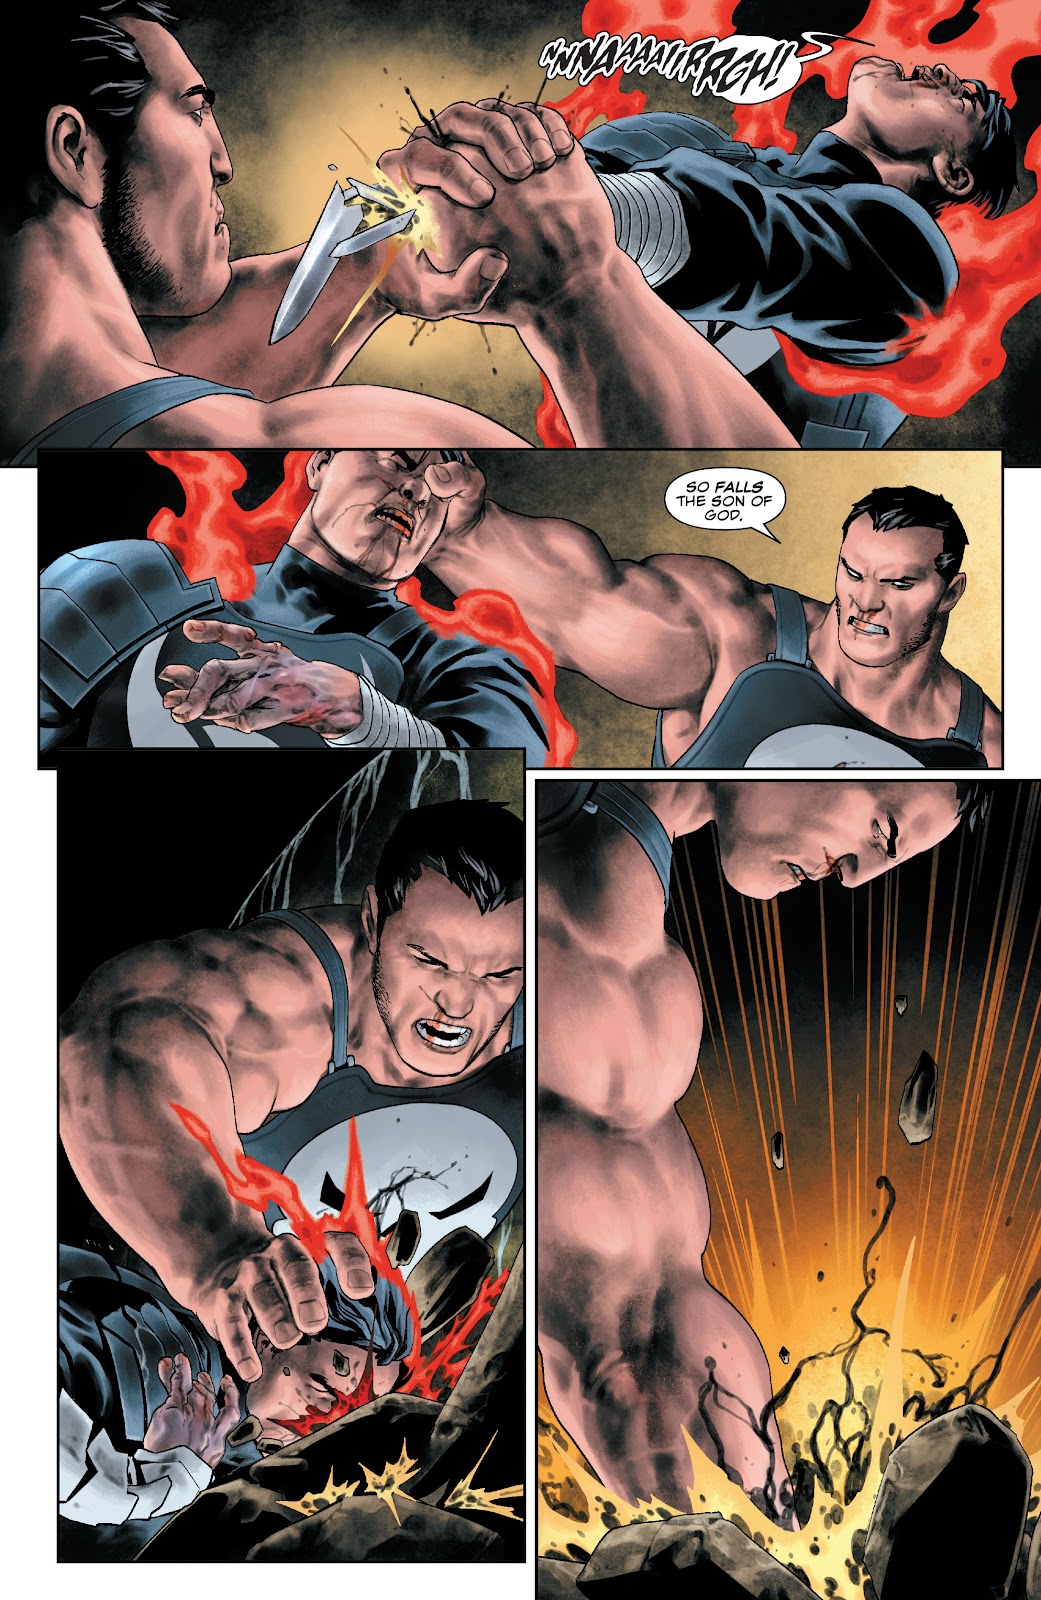 The God Of War VS The Punisher